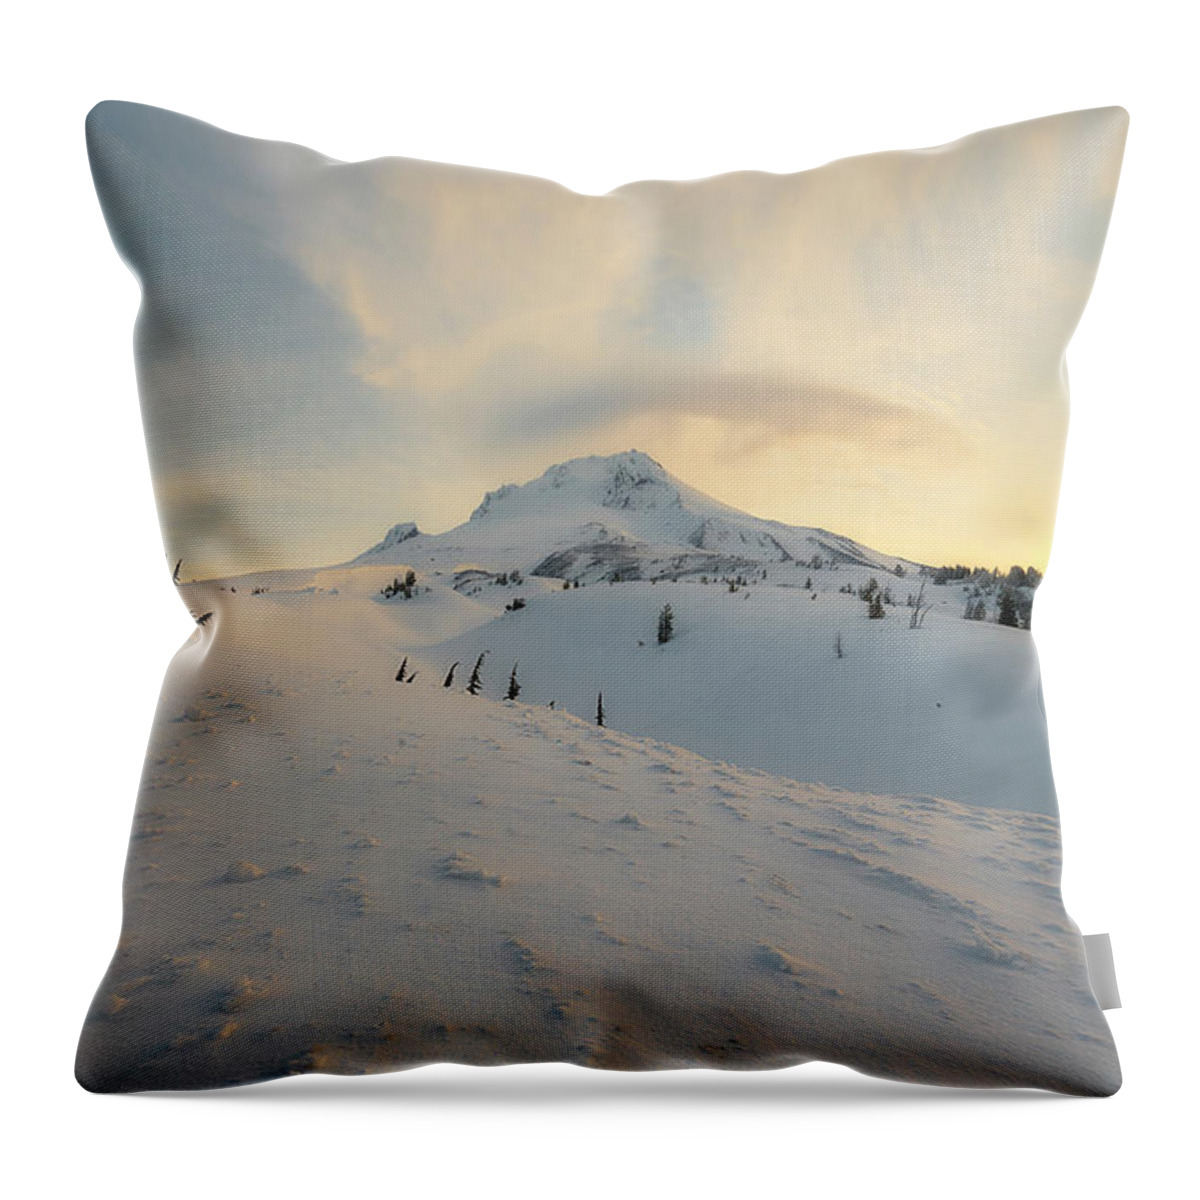 Spring Throw Pillow featuring the photograph Winter Textures by Ryan Manuel